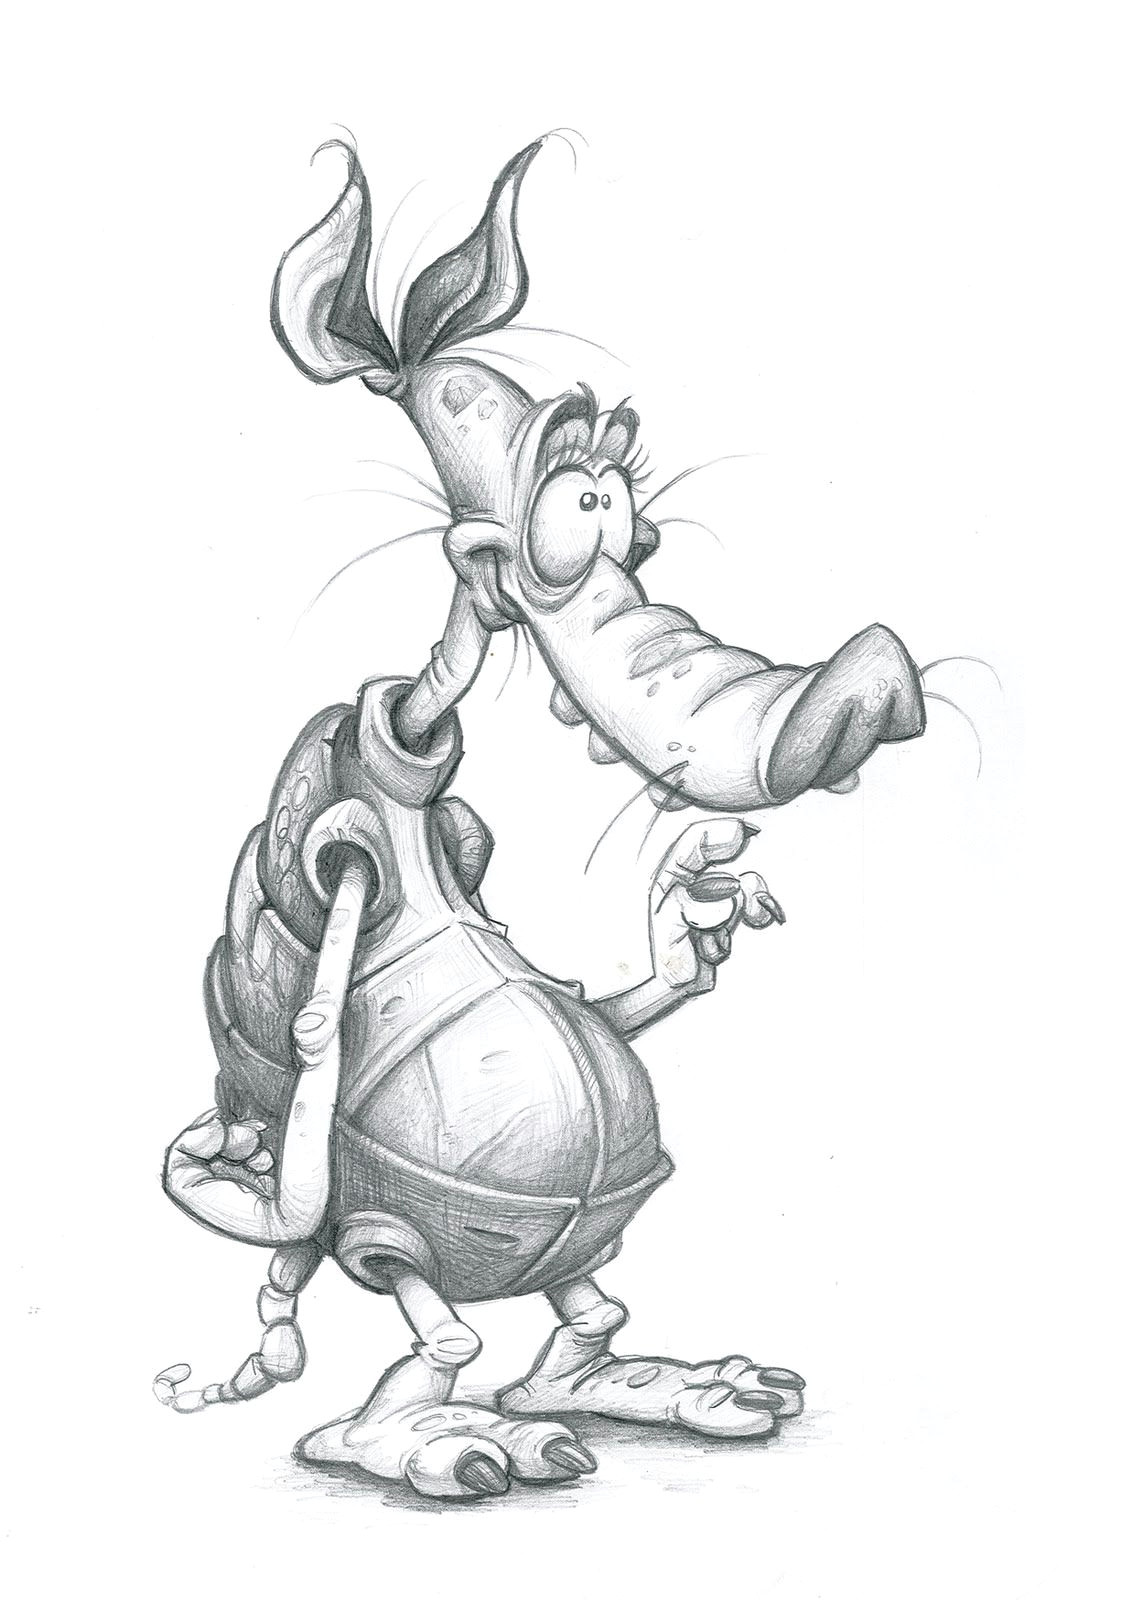 cool armadillo sketch by oscar jimenez cool sketches cartoon sketches drawing sketches pencil